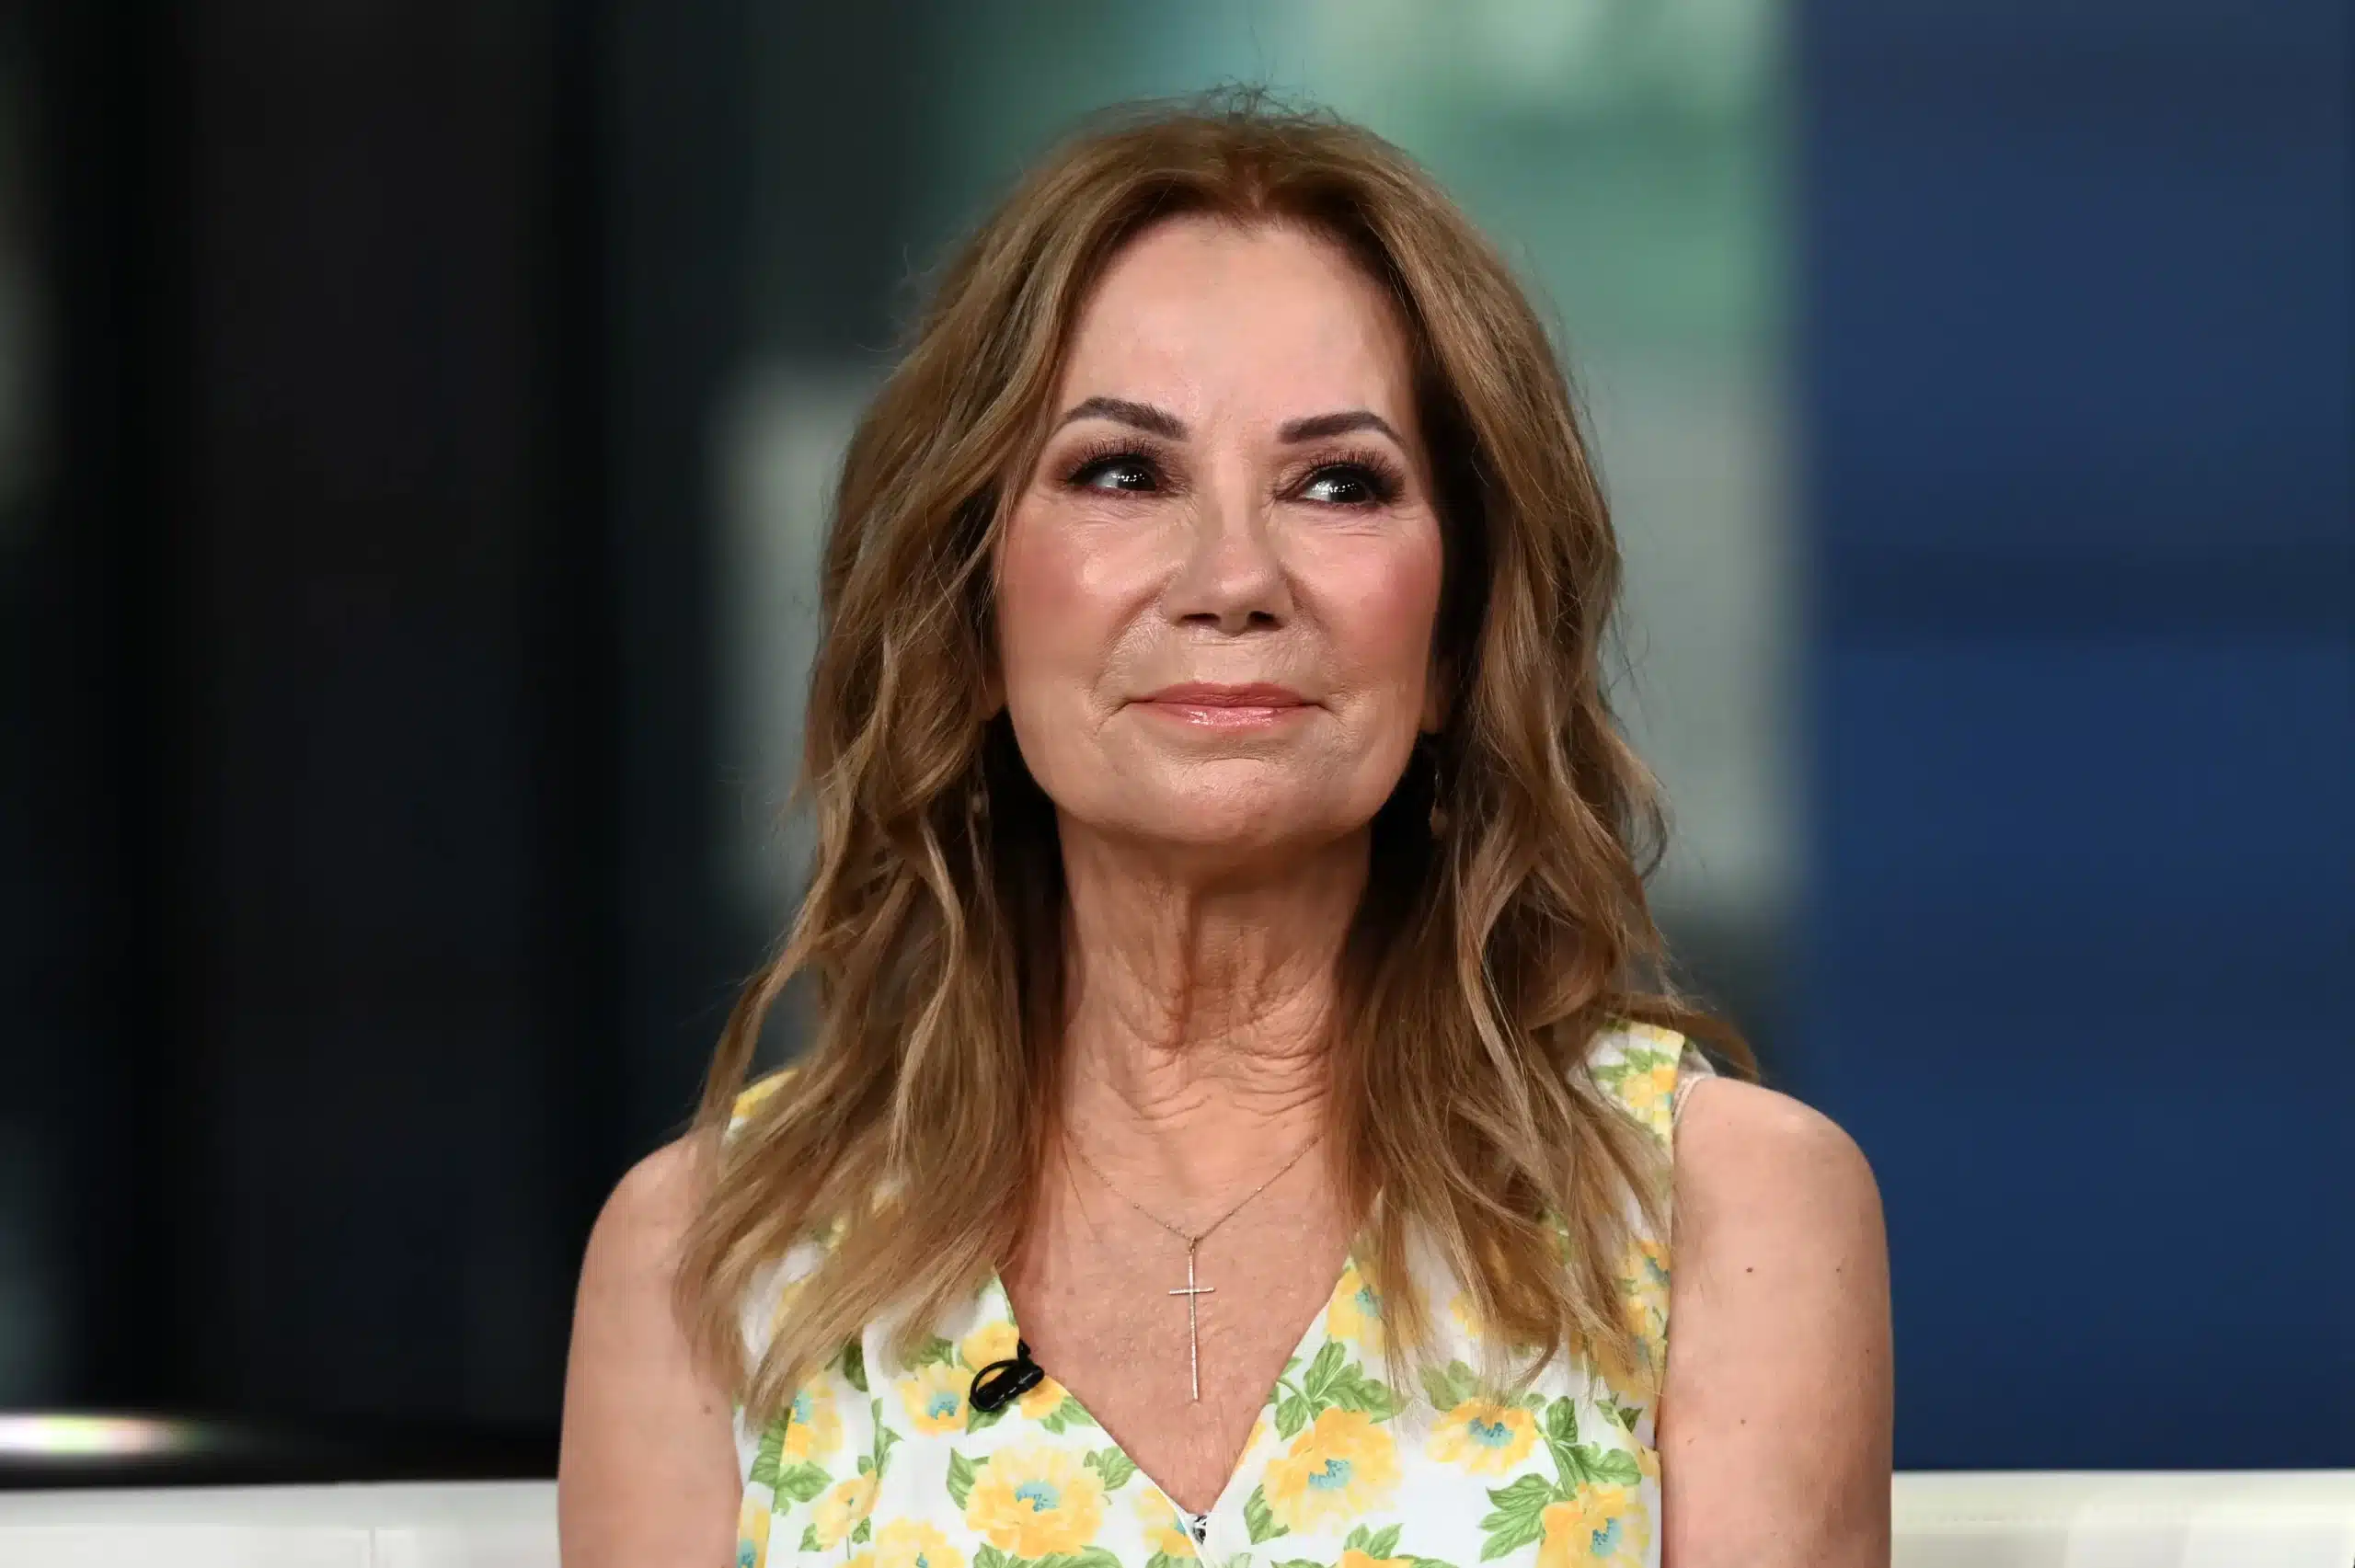 Is Kathie Lee Gifford related to Jeffrey Epstein?